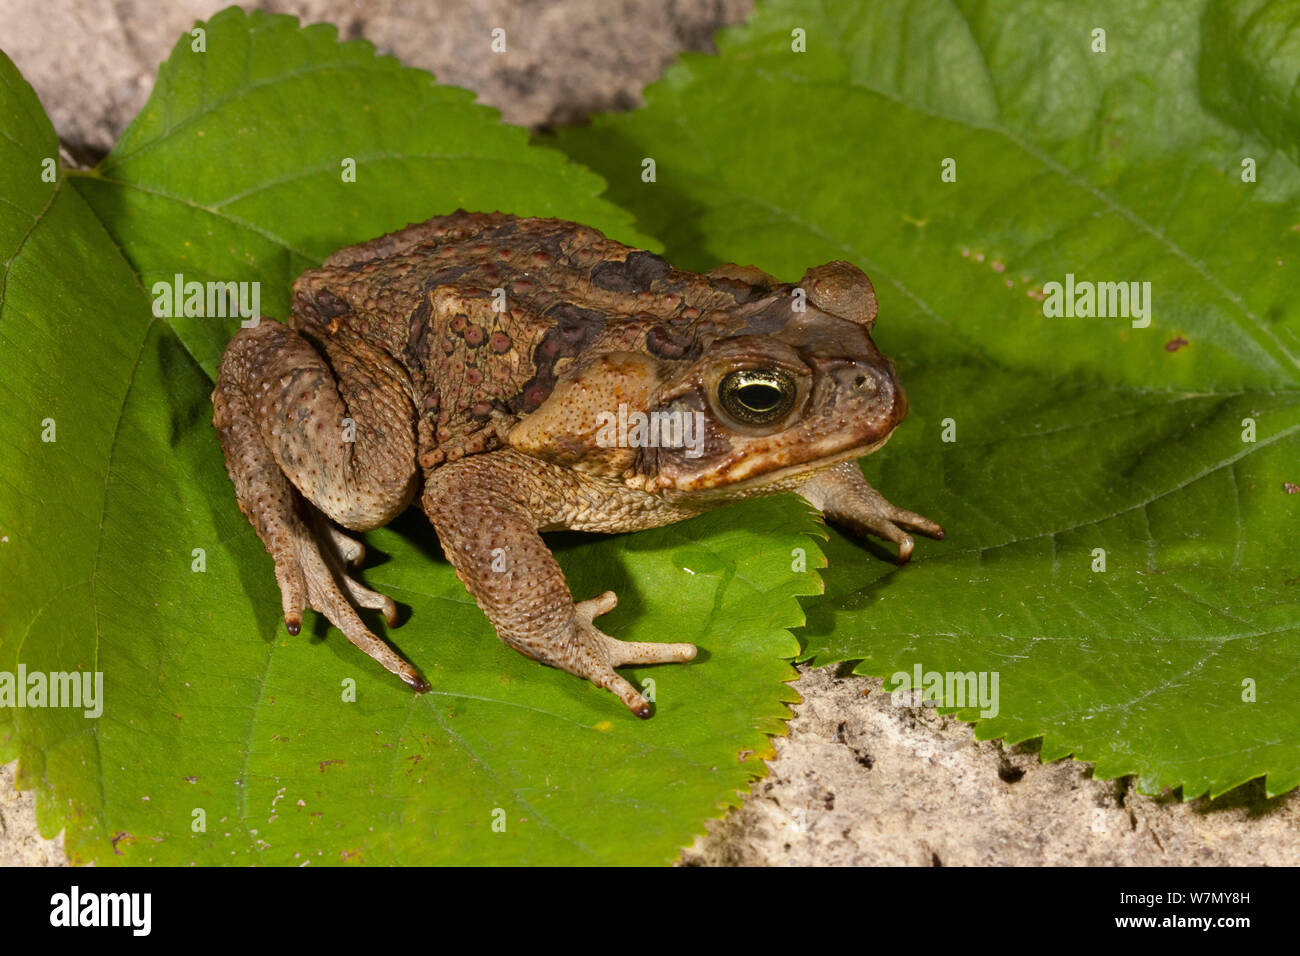 Giant / Cane toad (Rhinella marina) introduced species in South Florida, USA. Stock Photo